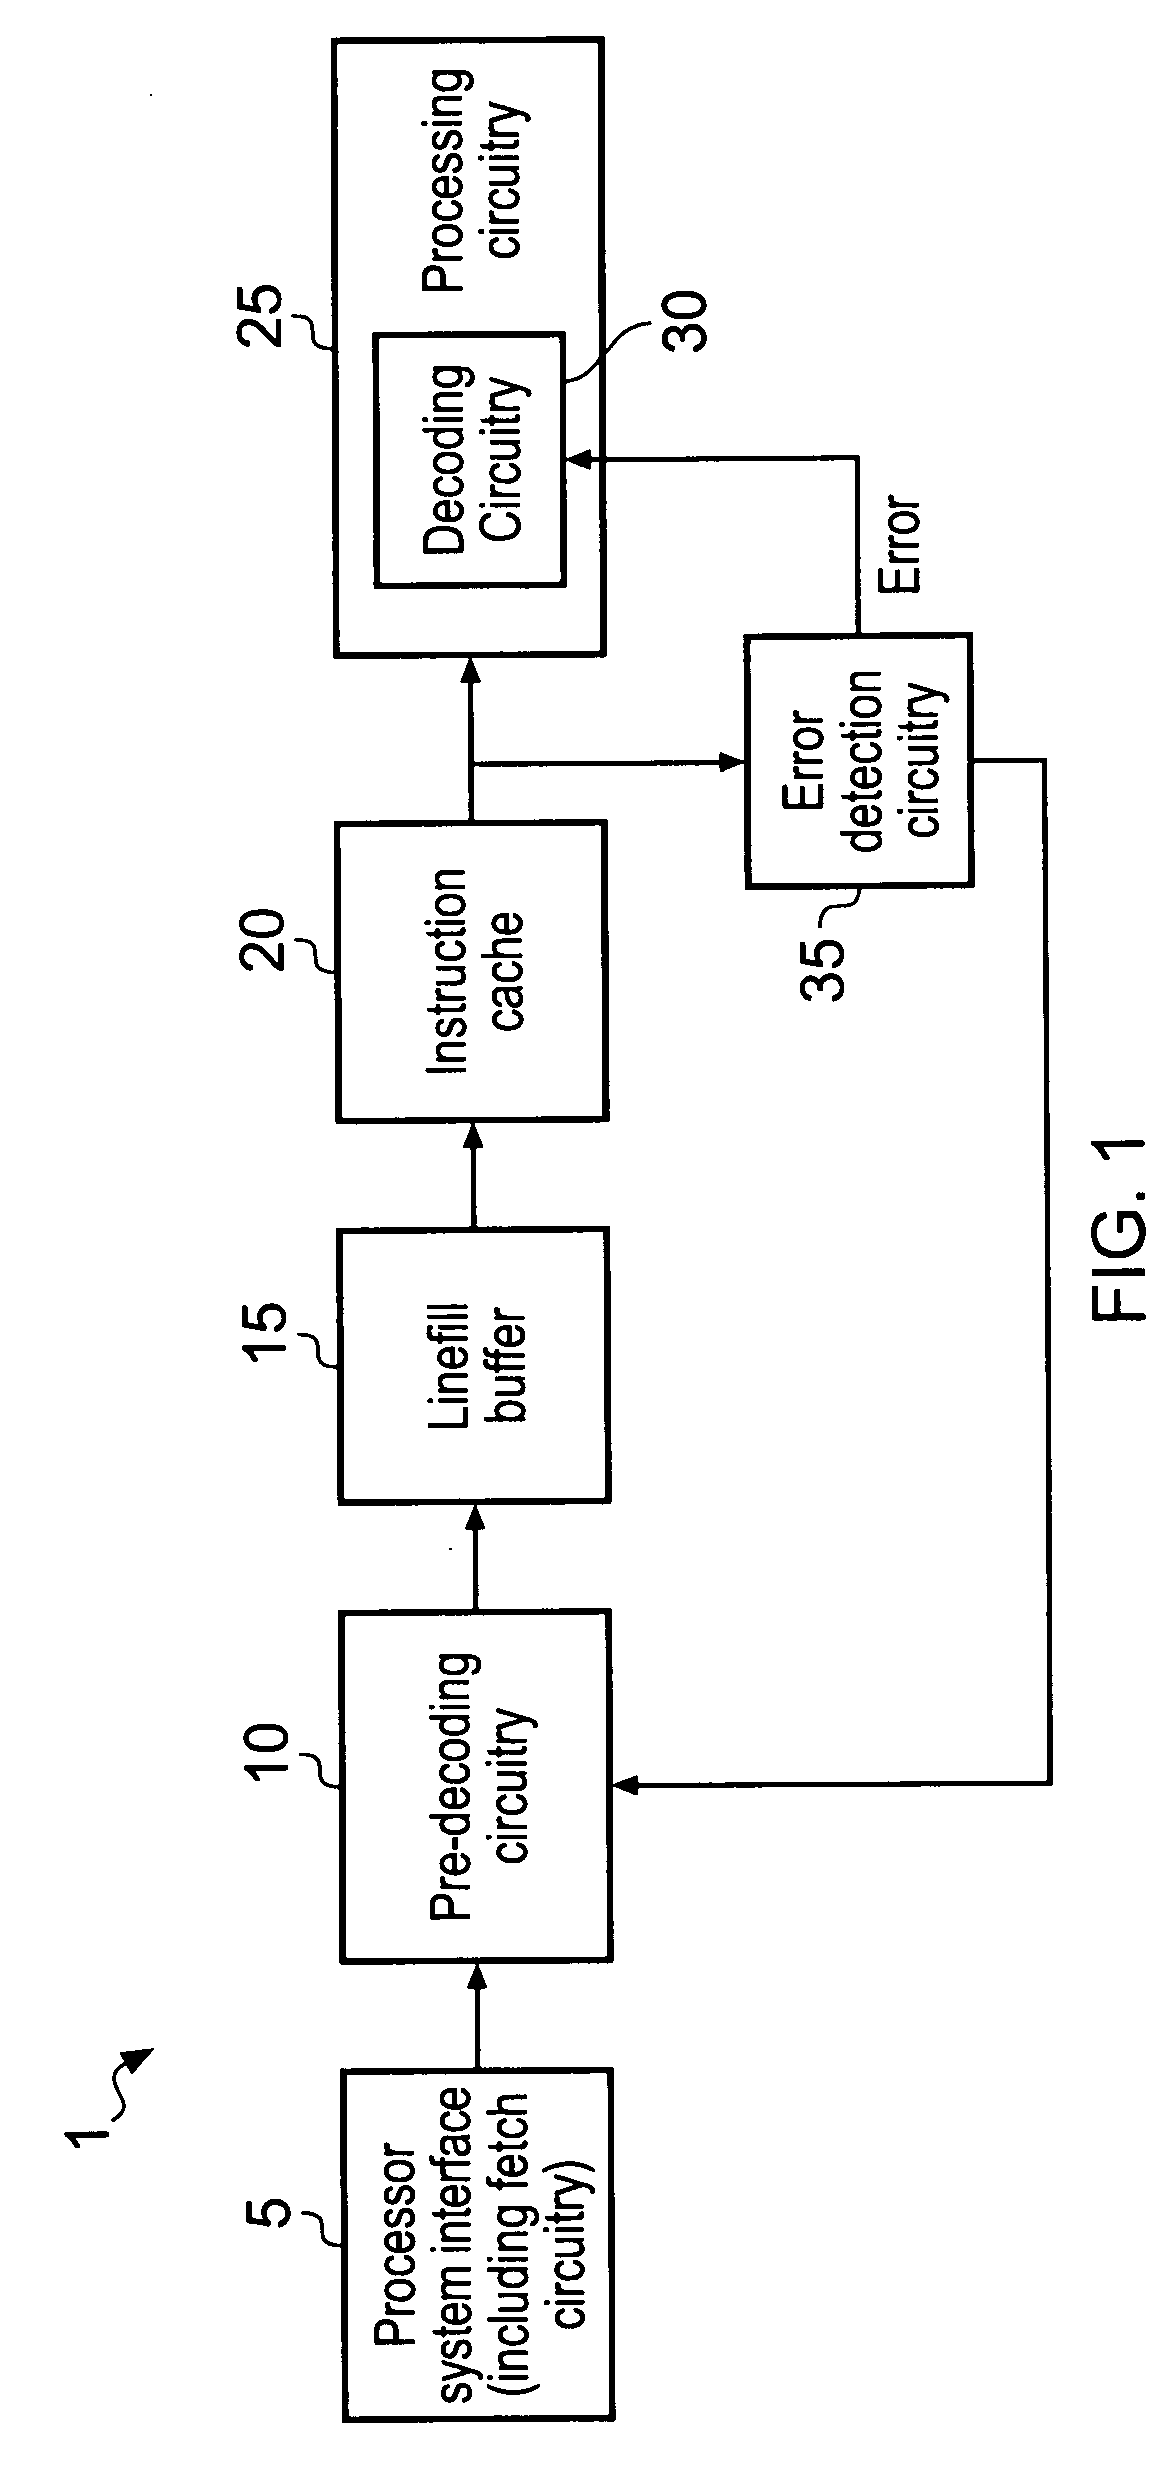 Data processing apparatus and method for handling instructions to be executed by processing circuitry